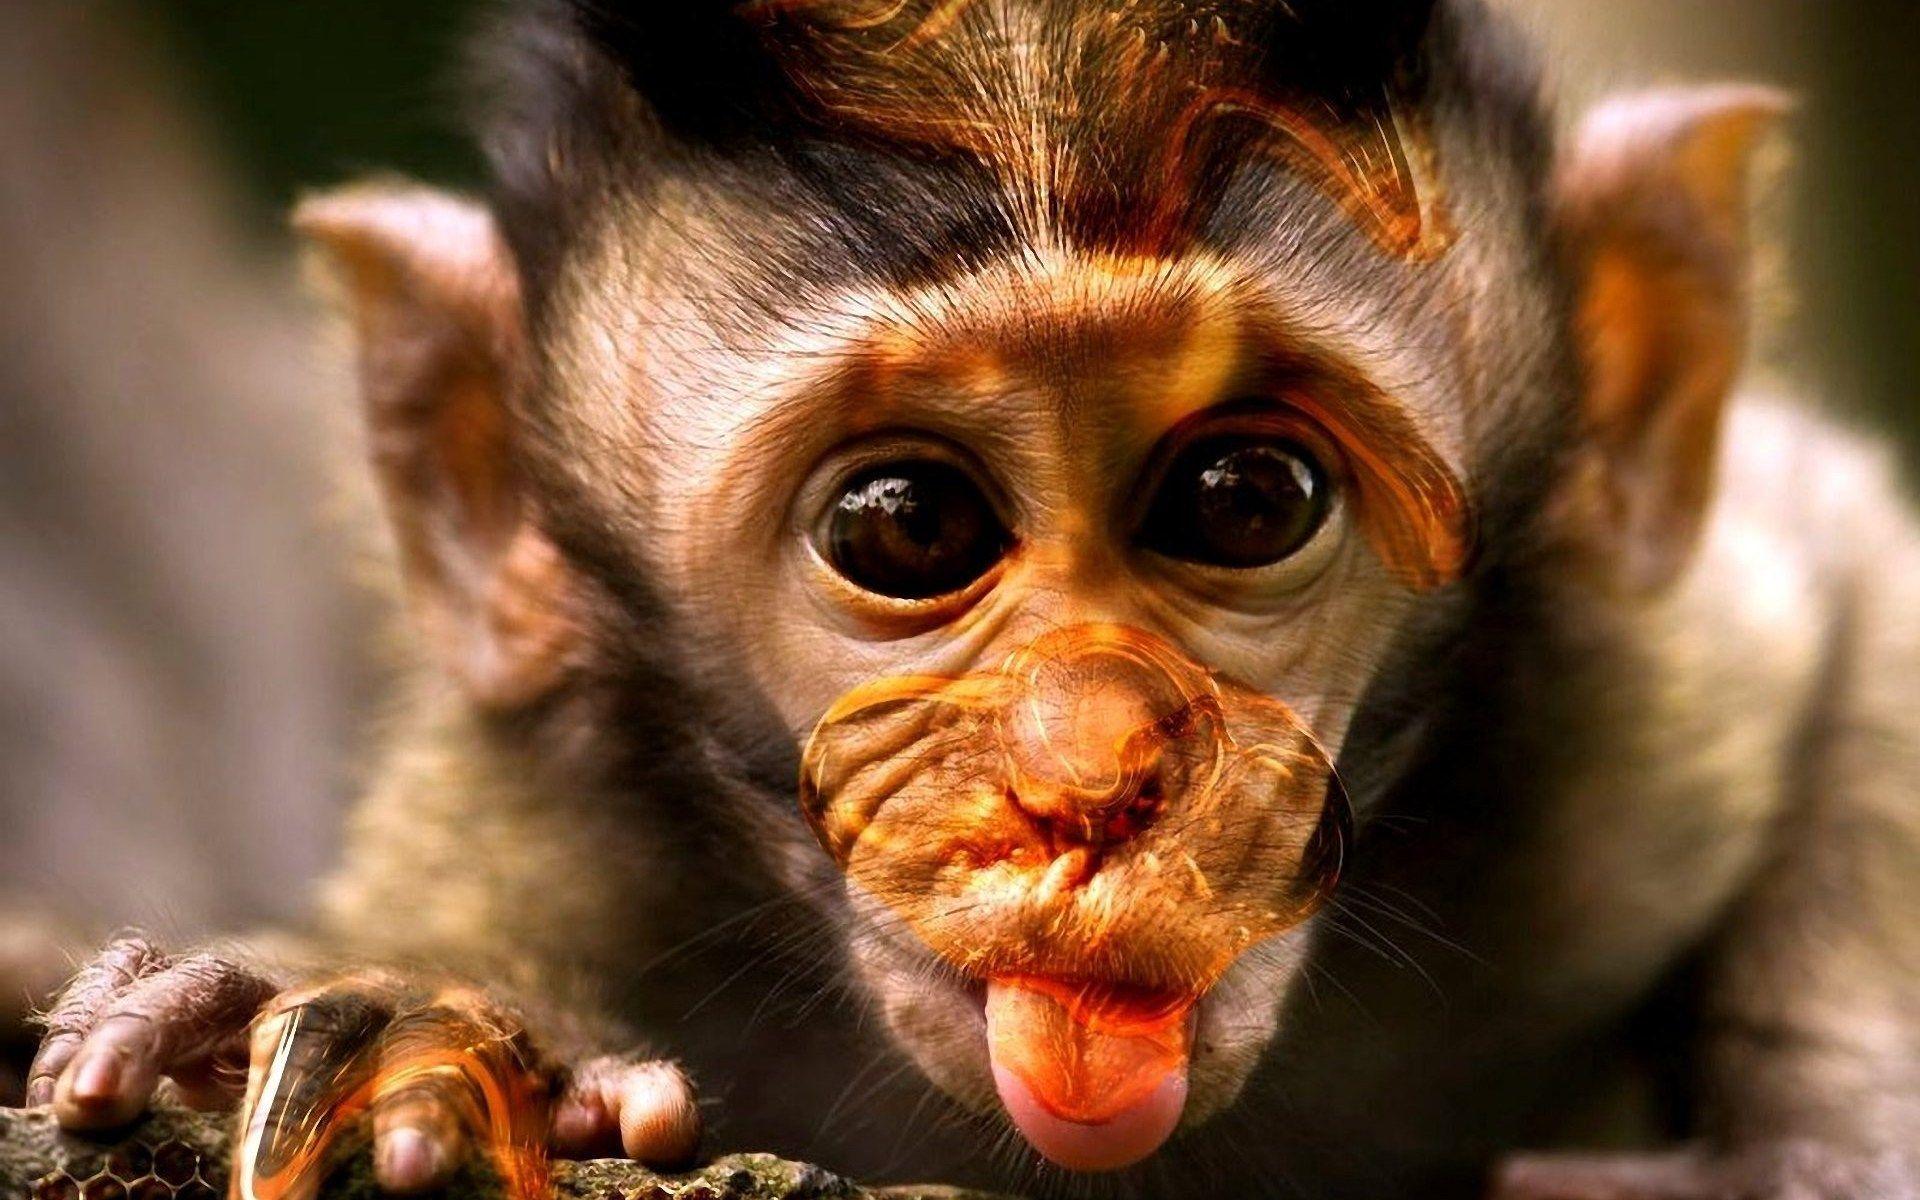 [74+] Funny Monkey Pictures Wallpapers on WallpaperSafari